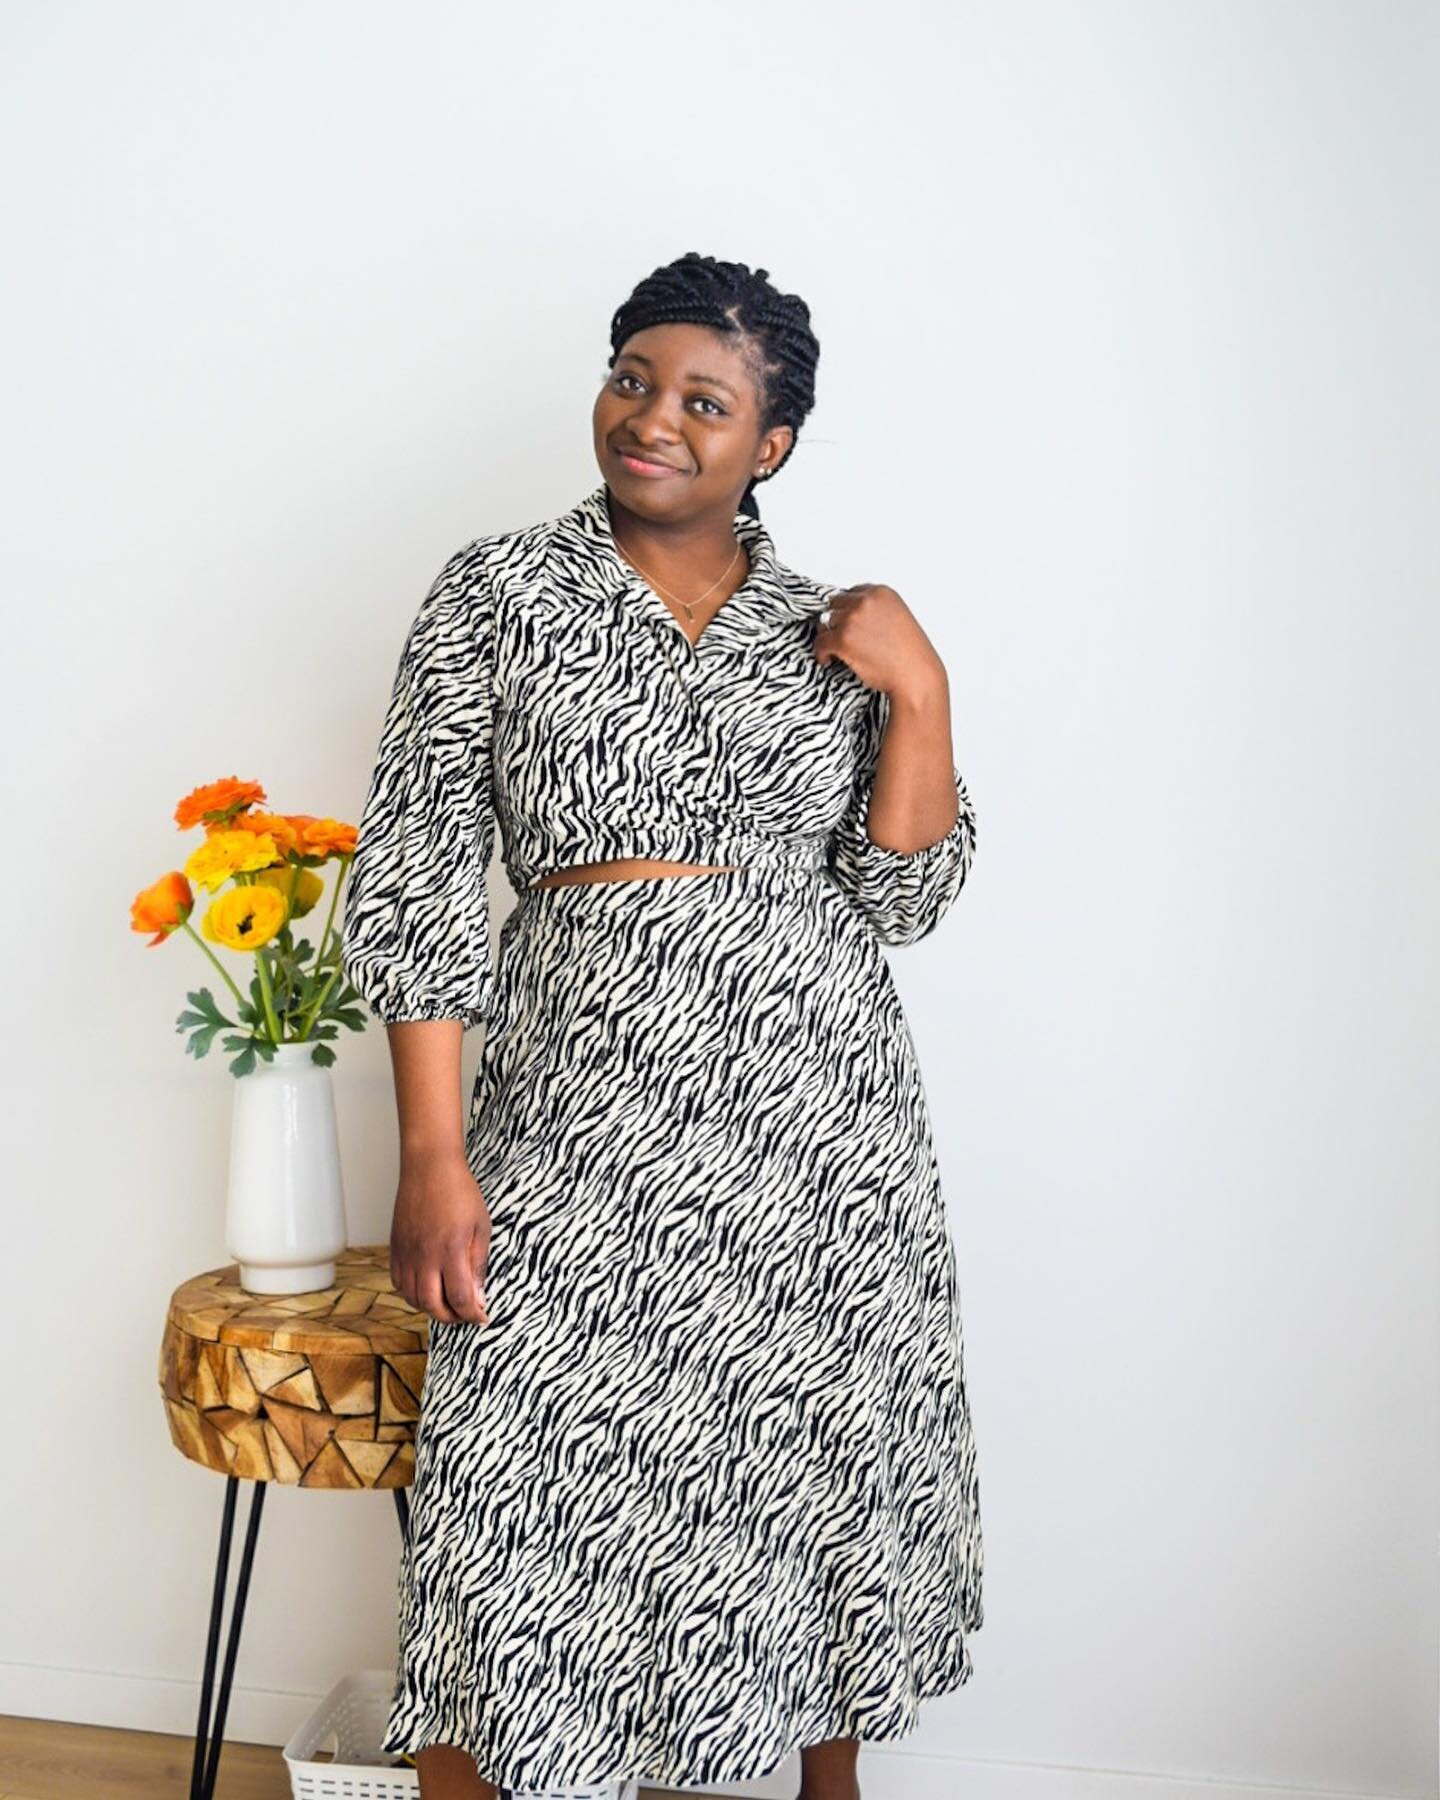 I feel so dang cute in this matching set y&rsquo;all! 💕 My first blog of the year is live with all the pattern deets #linkinbio

Pattern: Saturday skirt set @fridaypatterncompany in viscose crepe ✨
#memade #saturdayskirtset #springsewing #youcanhack